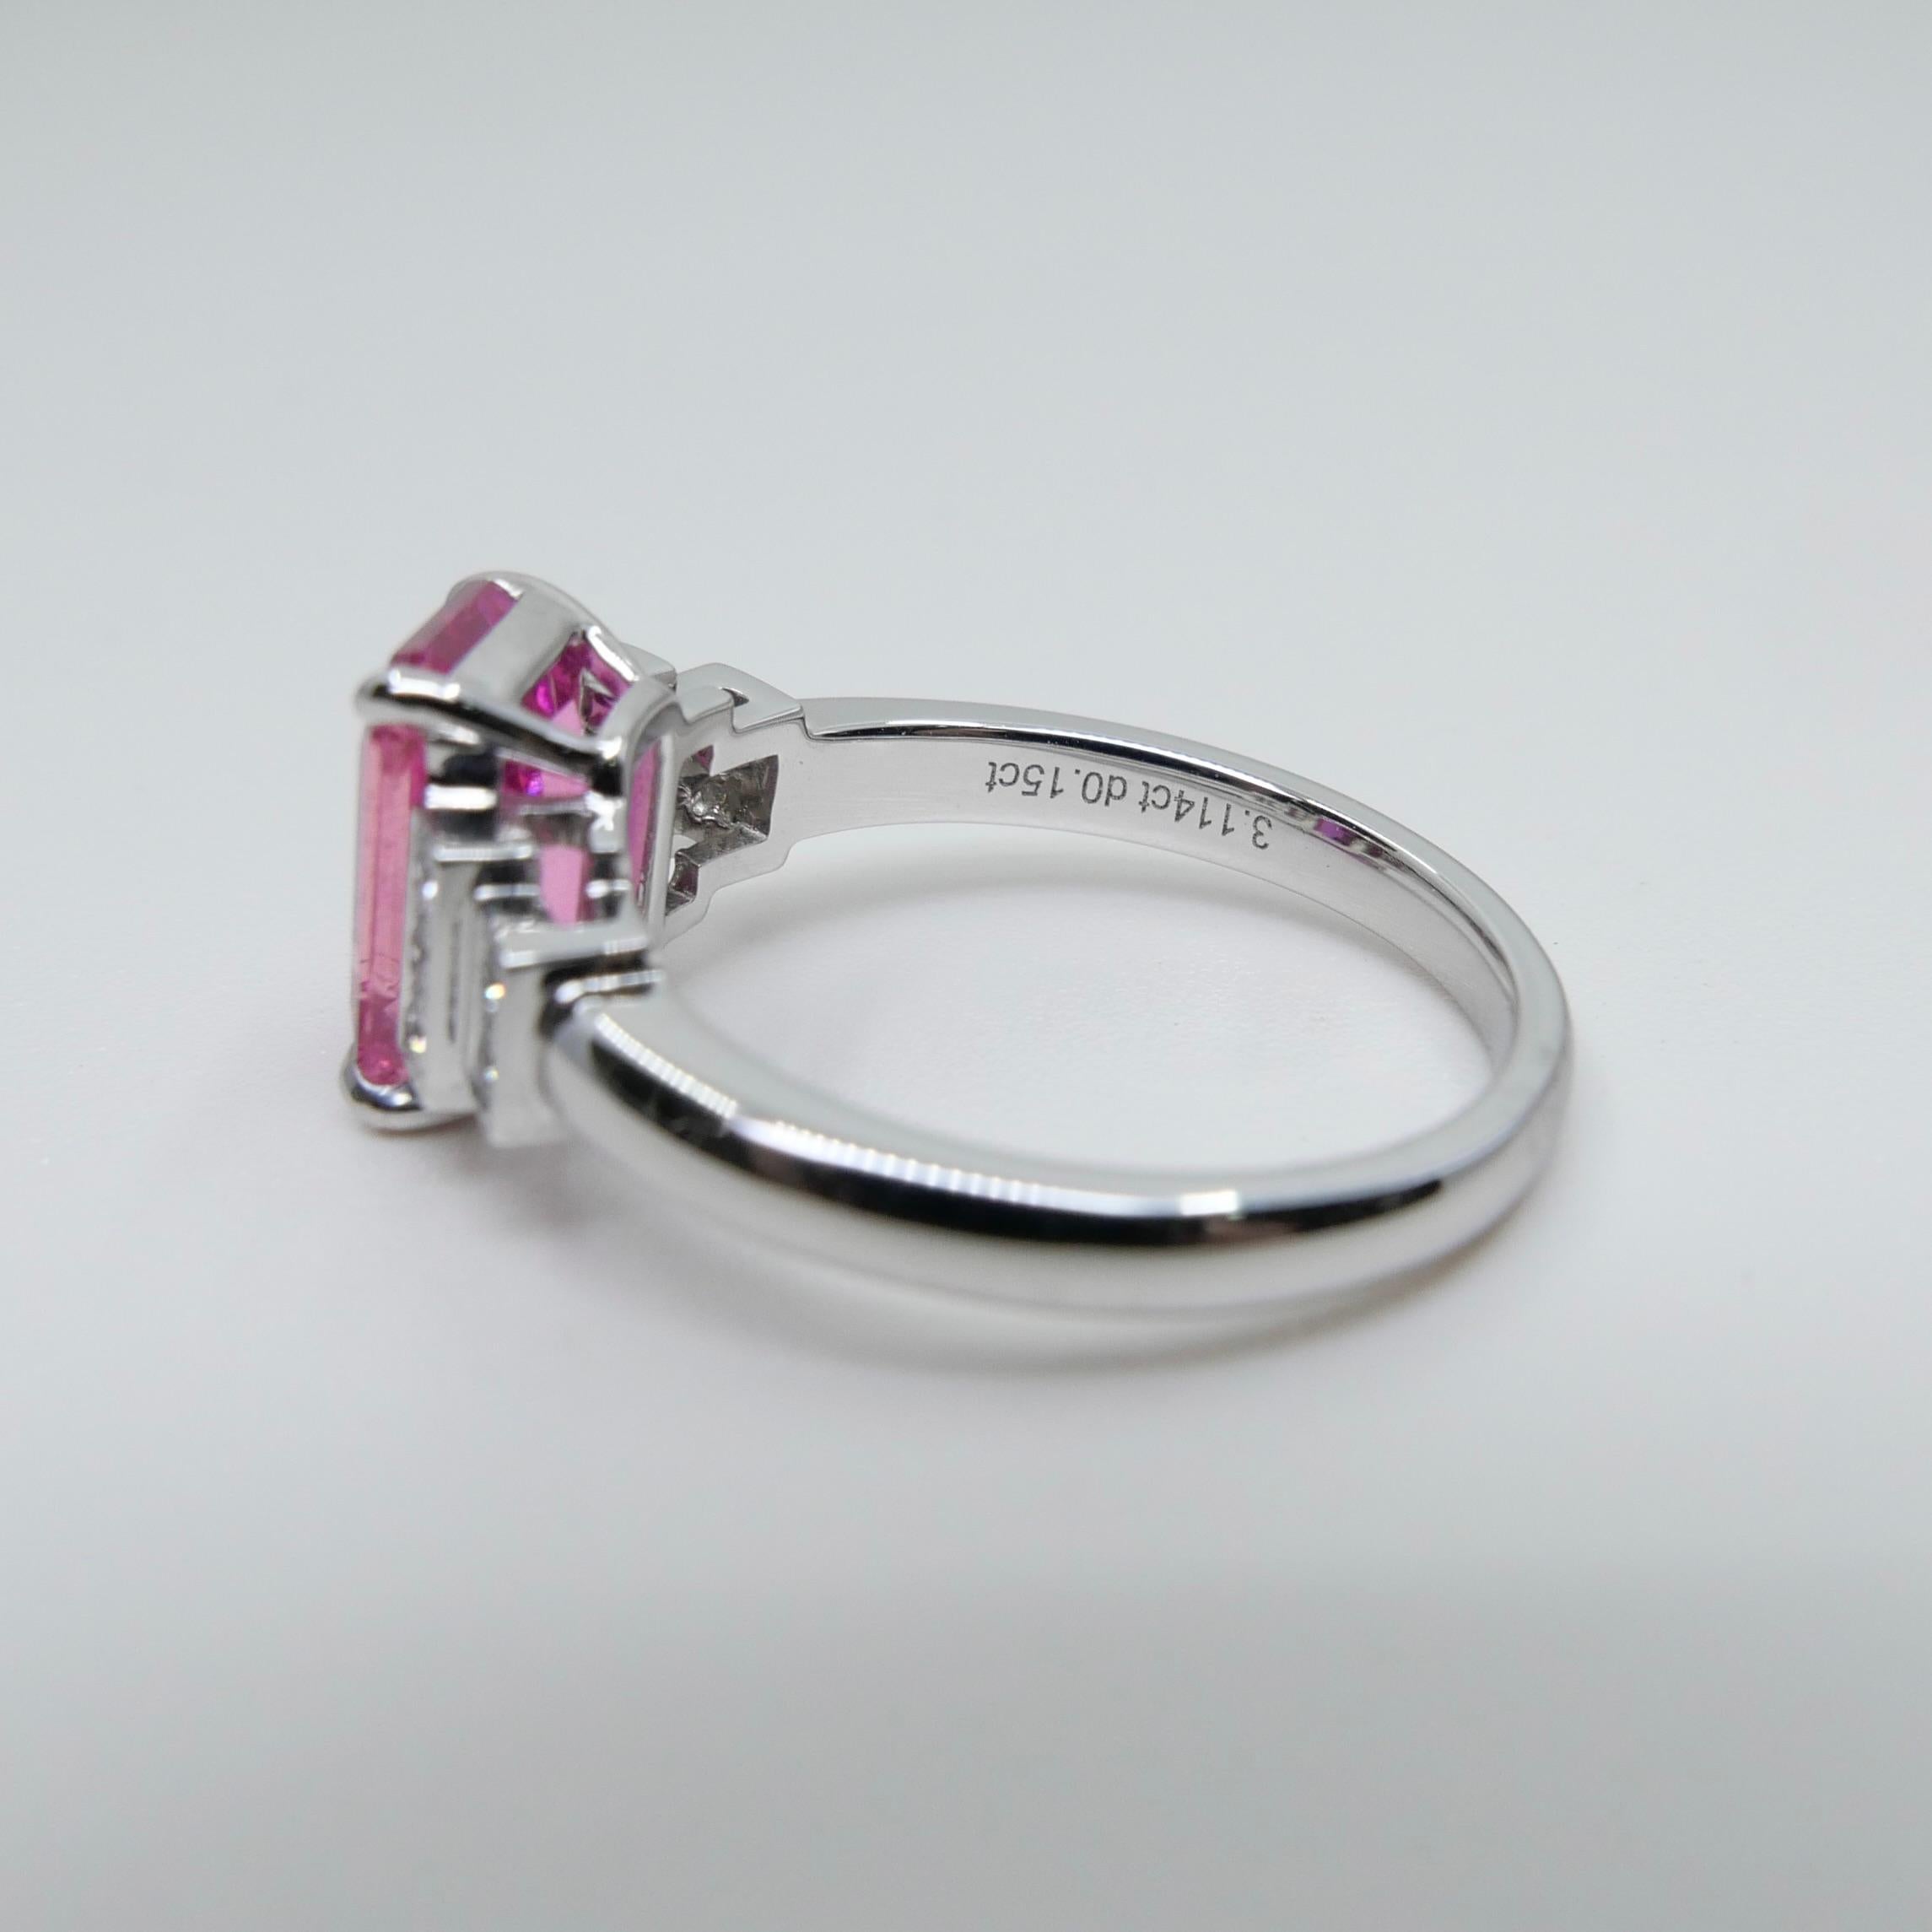 GRS Certified 3.11 Cts No Heat Pink Sapphire & Diamond Ring. Art Deco Style 6